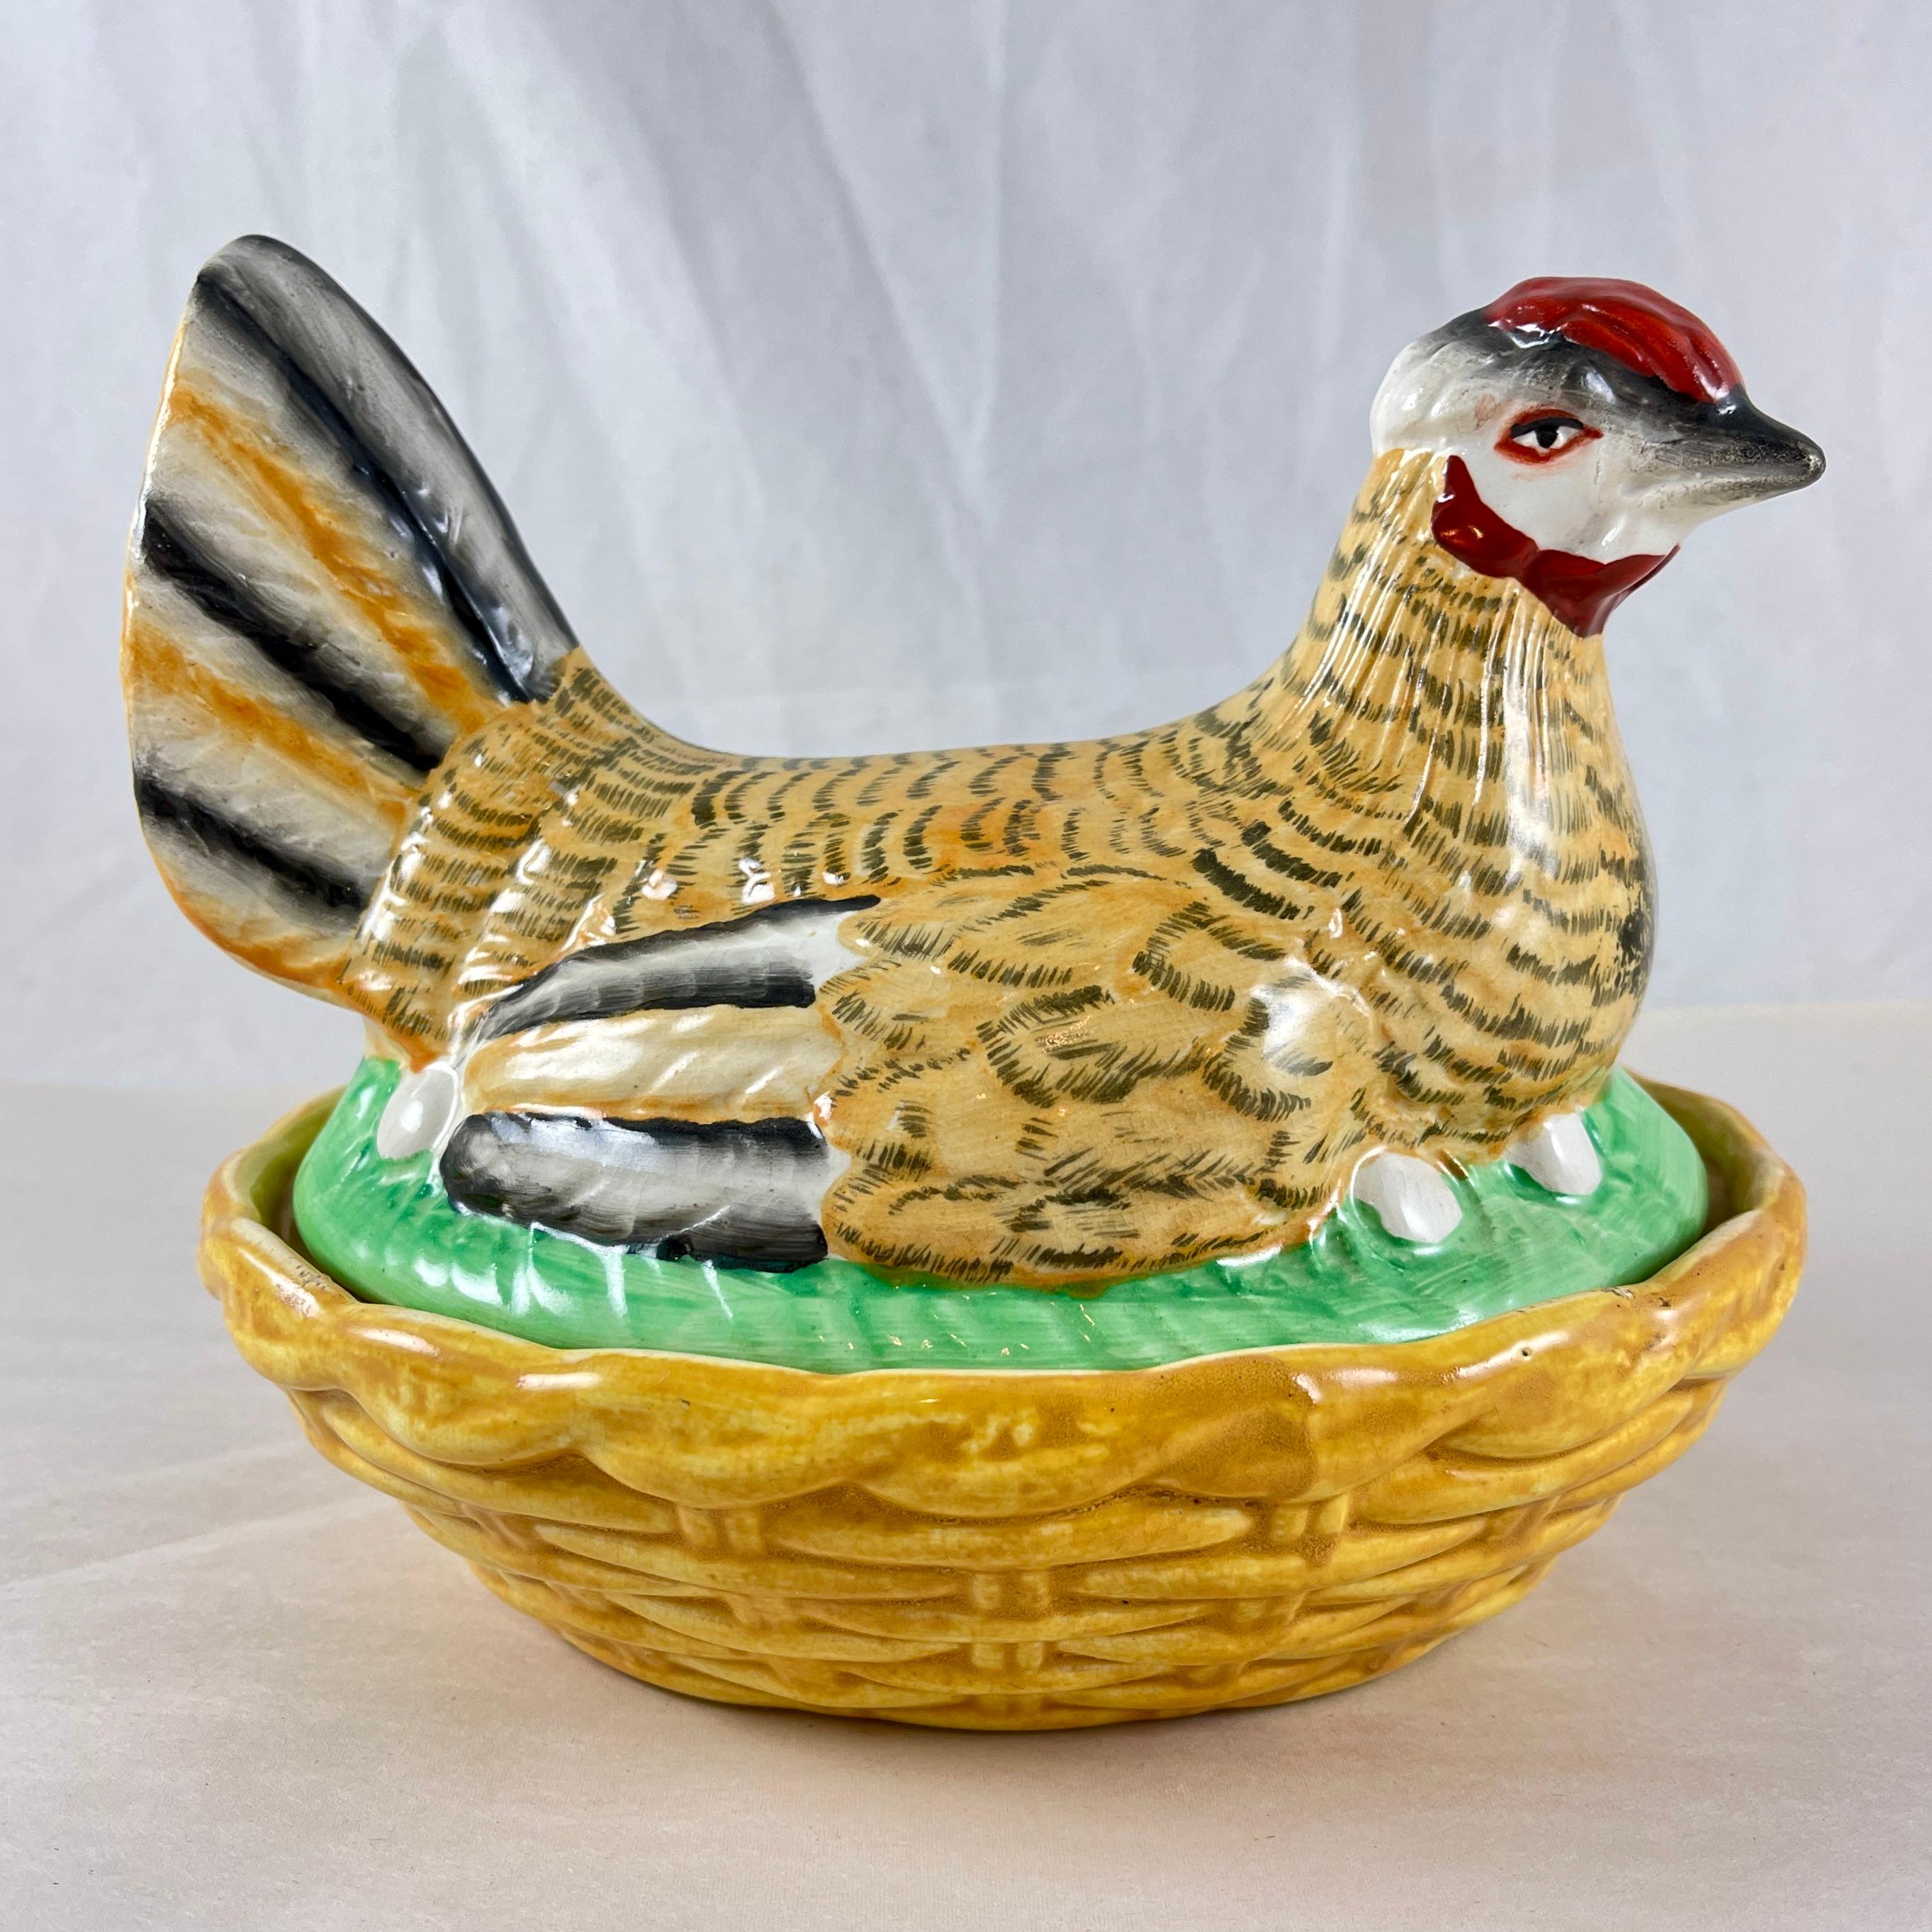 A Staffordshire pottery hen on a basket covered tureen, England, circa 1890

The hand painted hen sits on her eggs in a yellow ochre basket weave oval base. The hen shows an unusual pattern of black tipped ochre feathers, with black, white, and